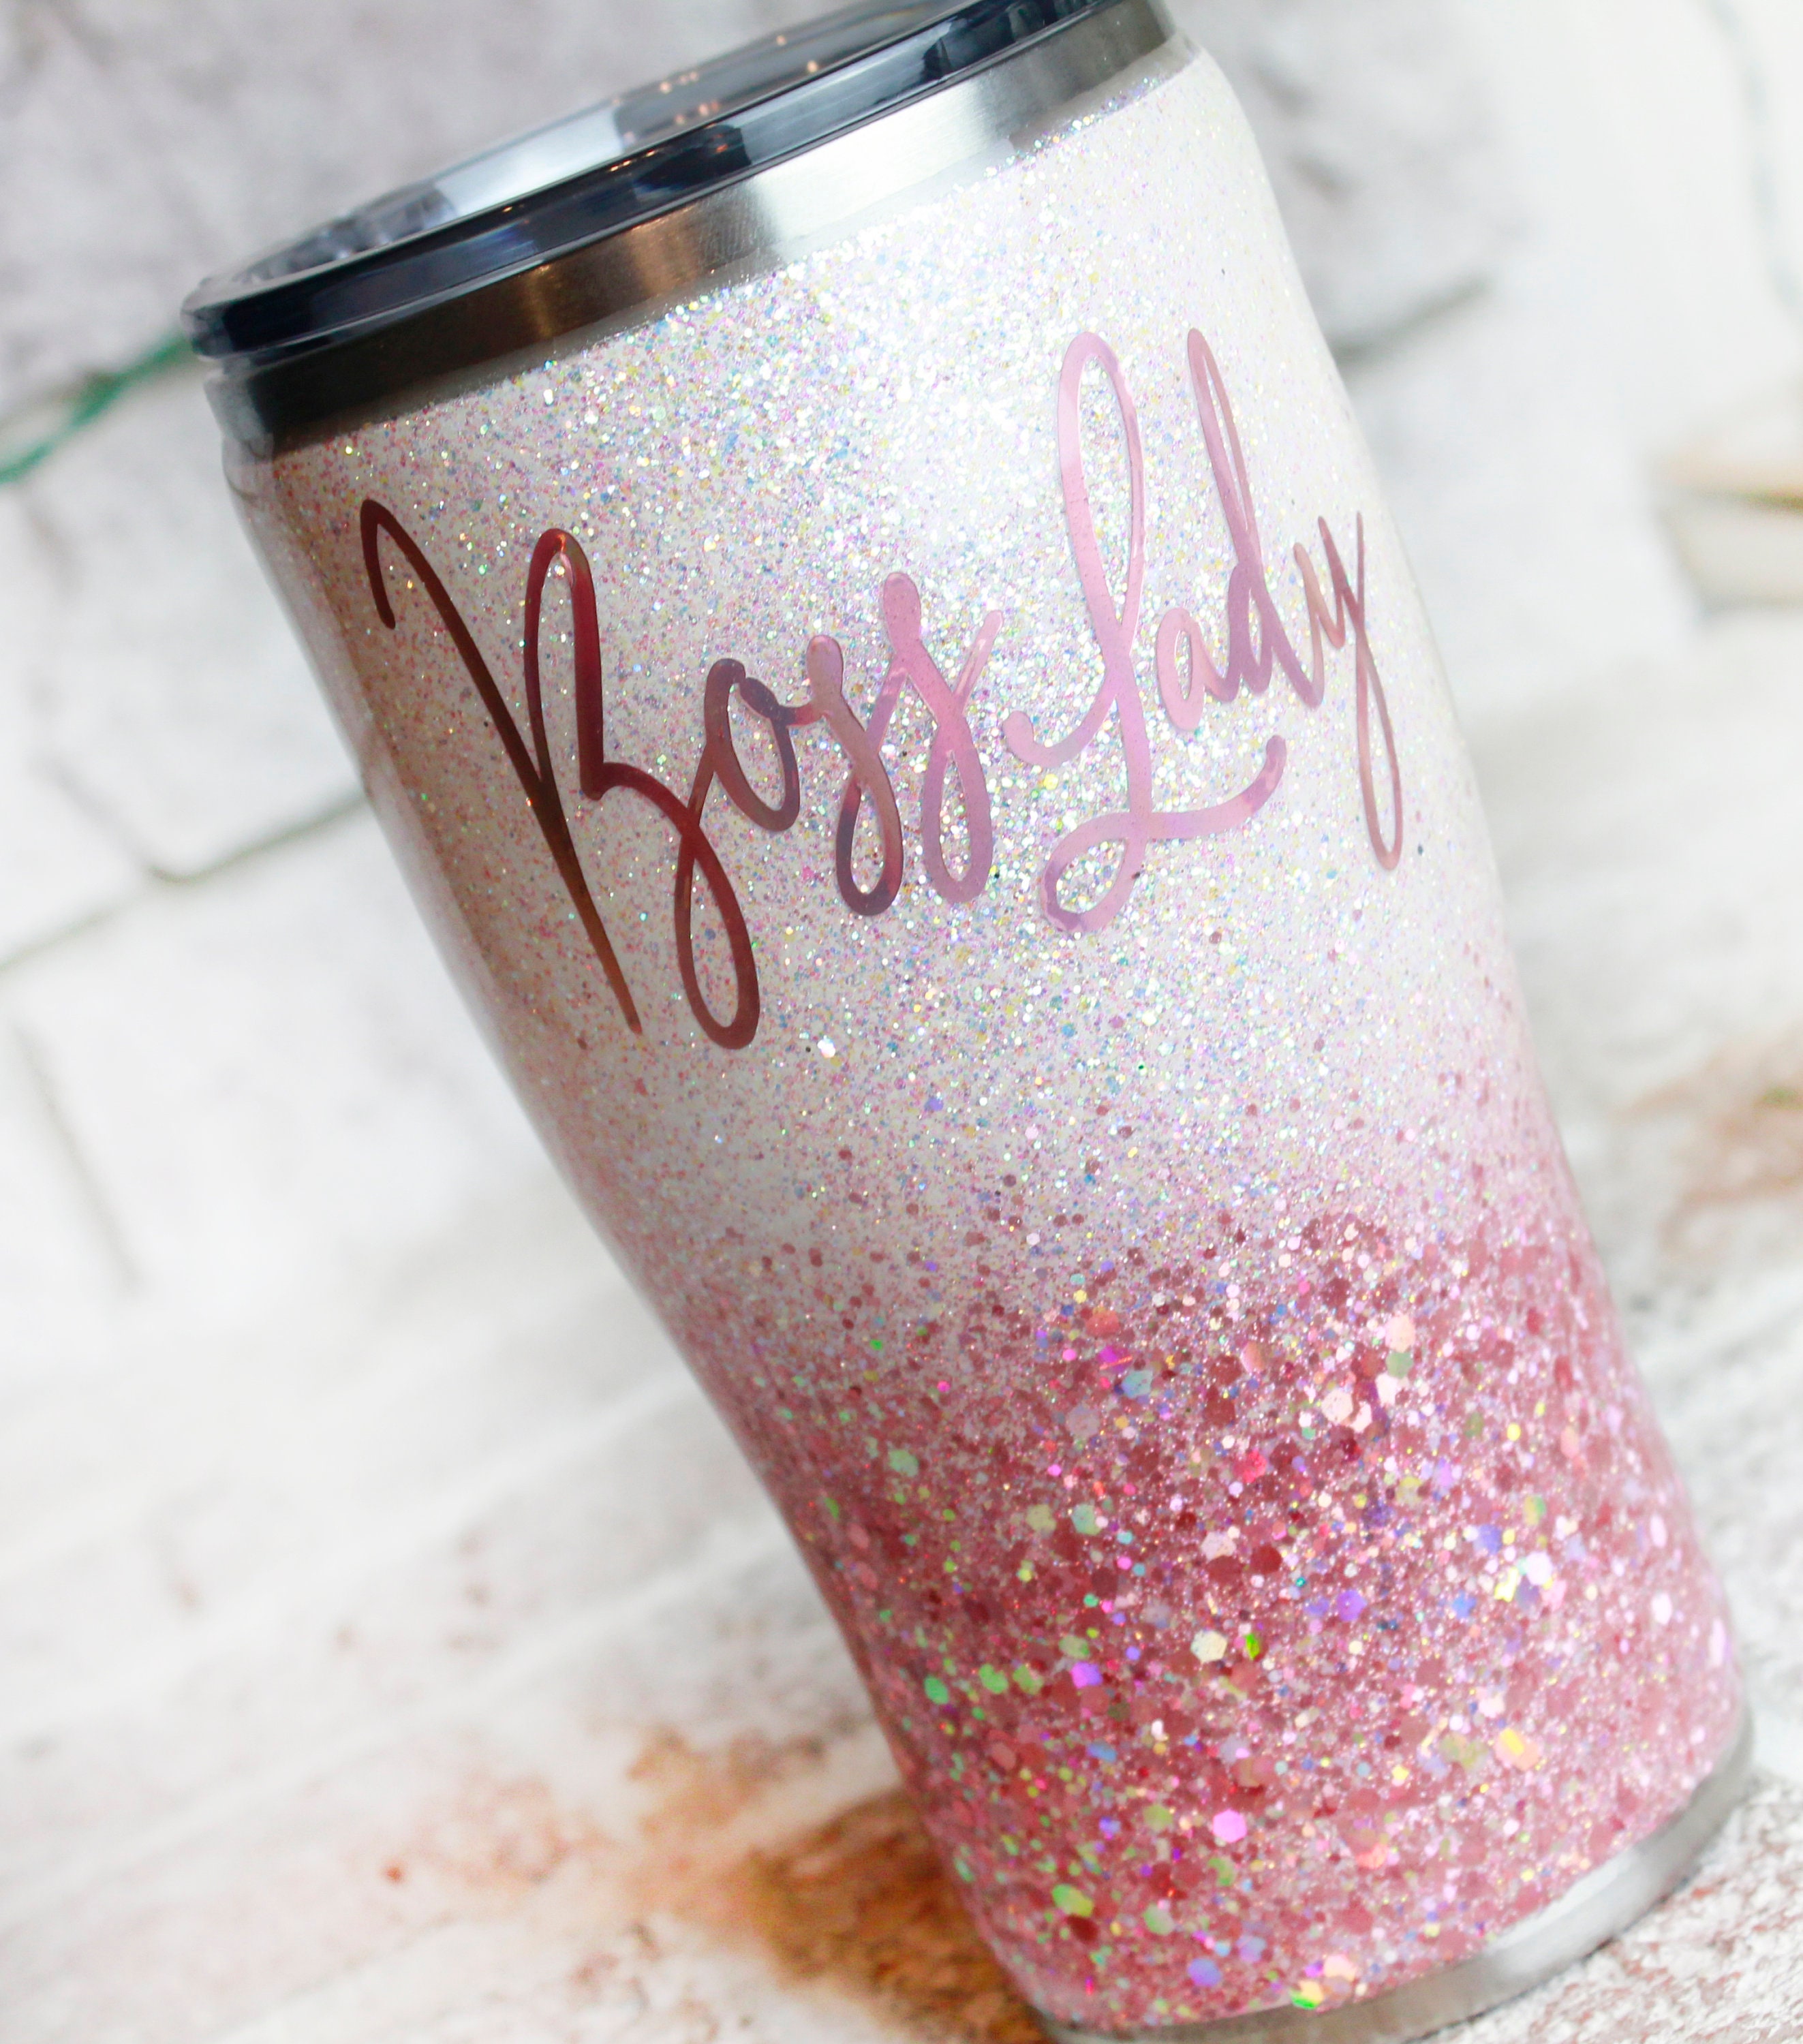 Glitter Tumbler Personalized Cup Glitter Cup Girls Cup Mug Gift Coffee Cup Glitter Cup with Name Birthday Cup Tumbler Cup